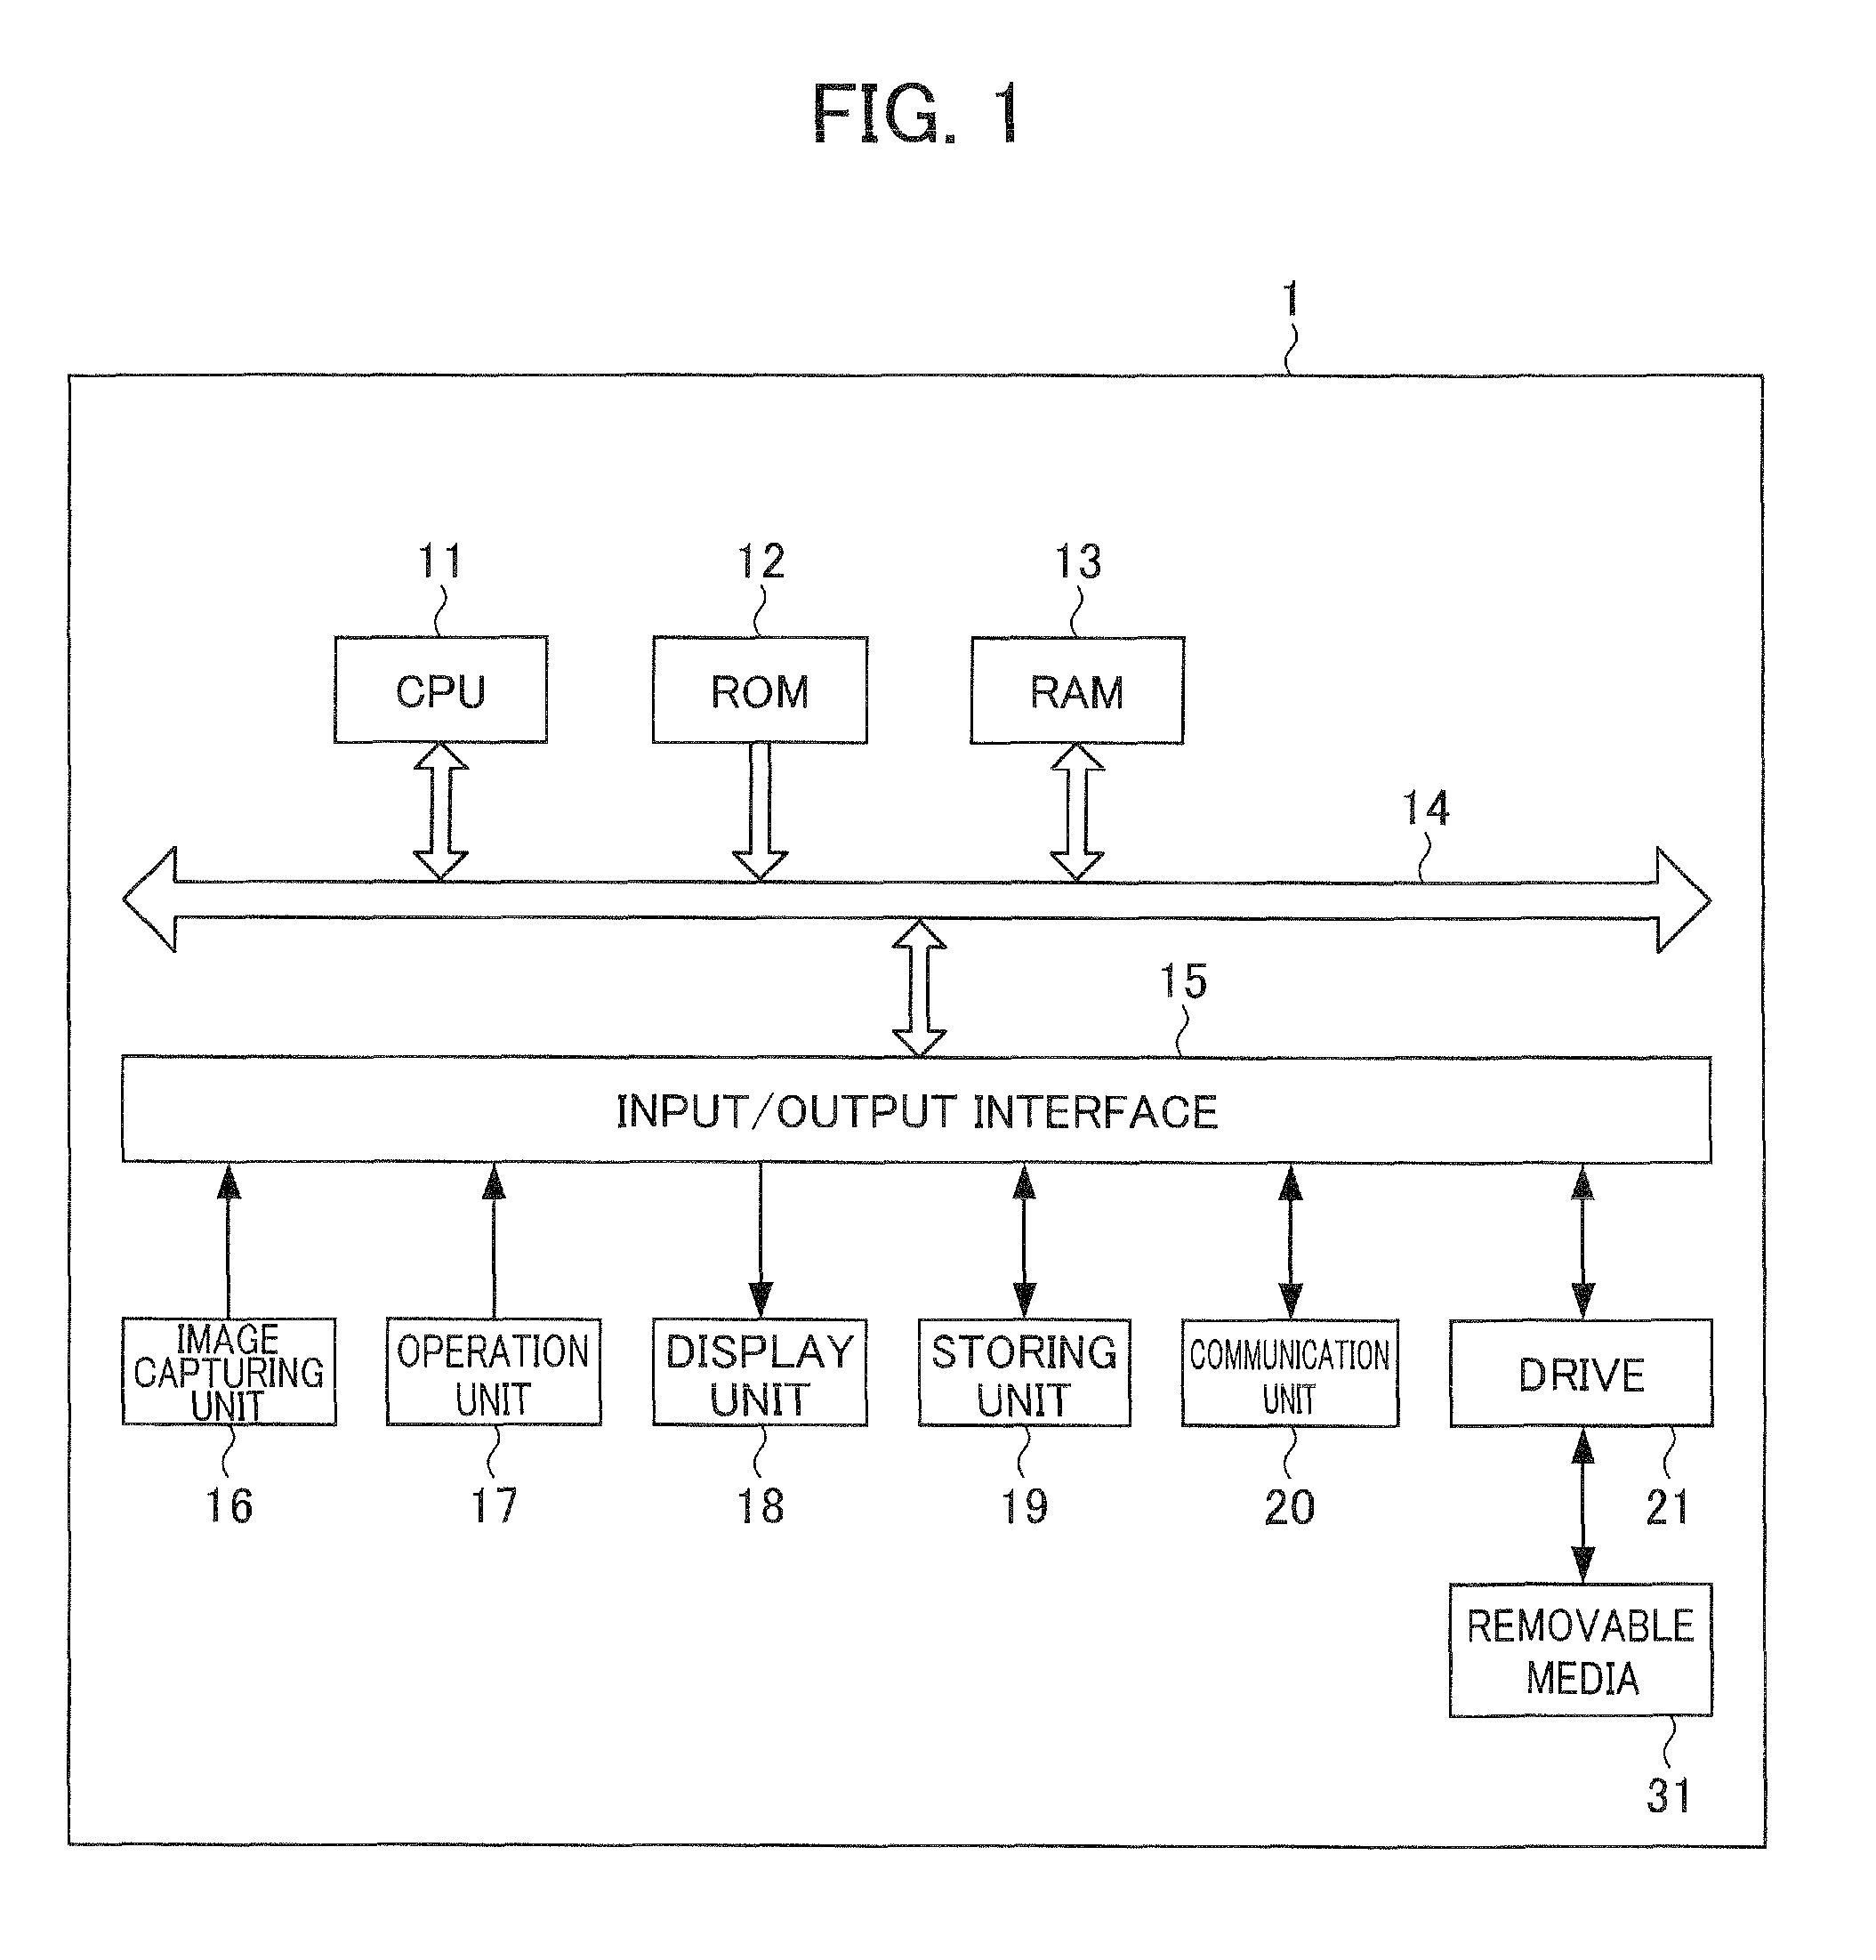 Image processing apparatus and storage medium having stored therein an image processing program